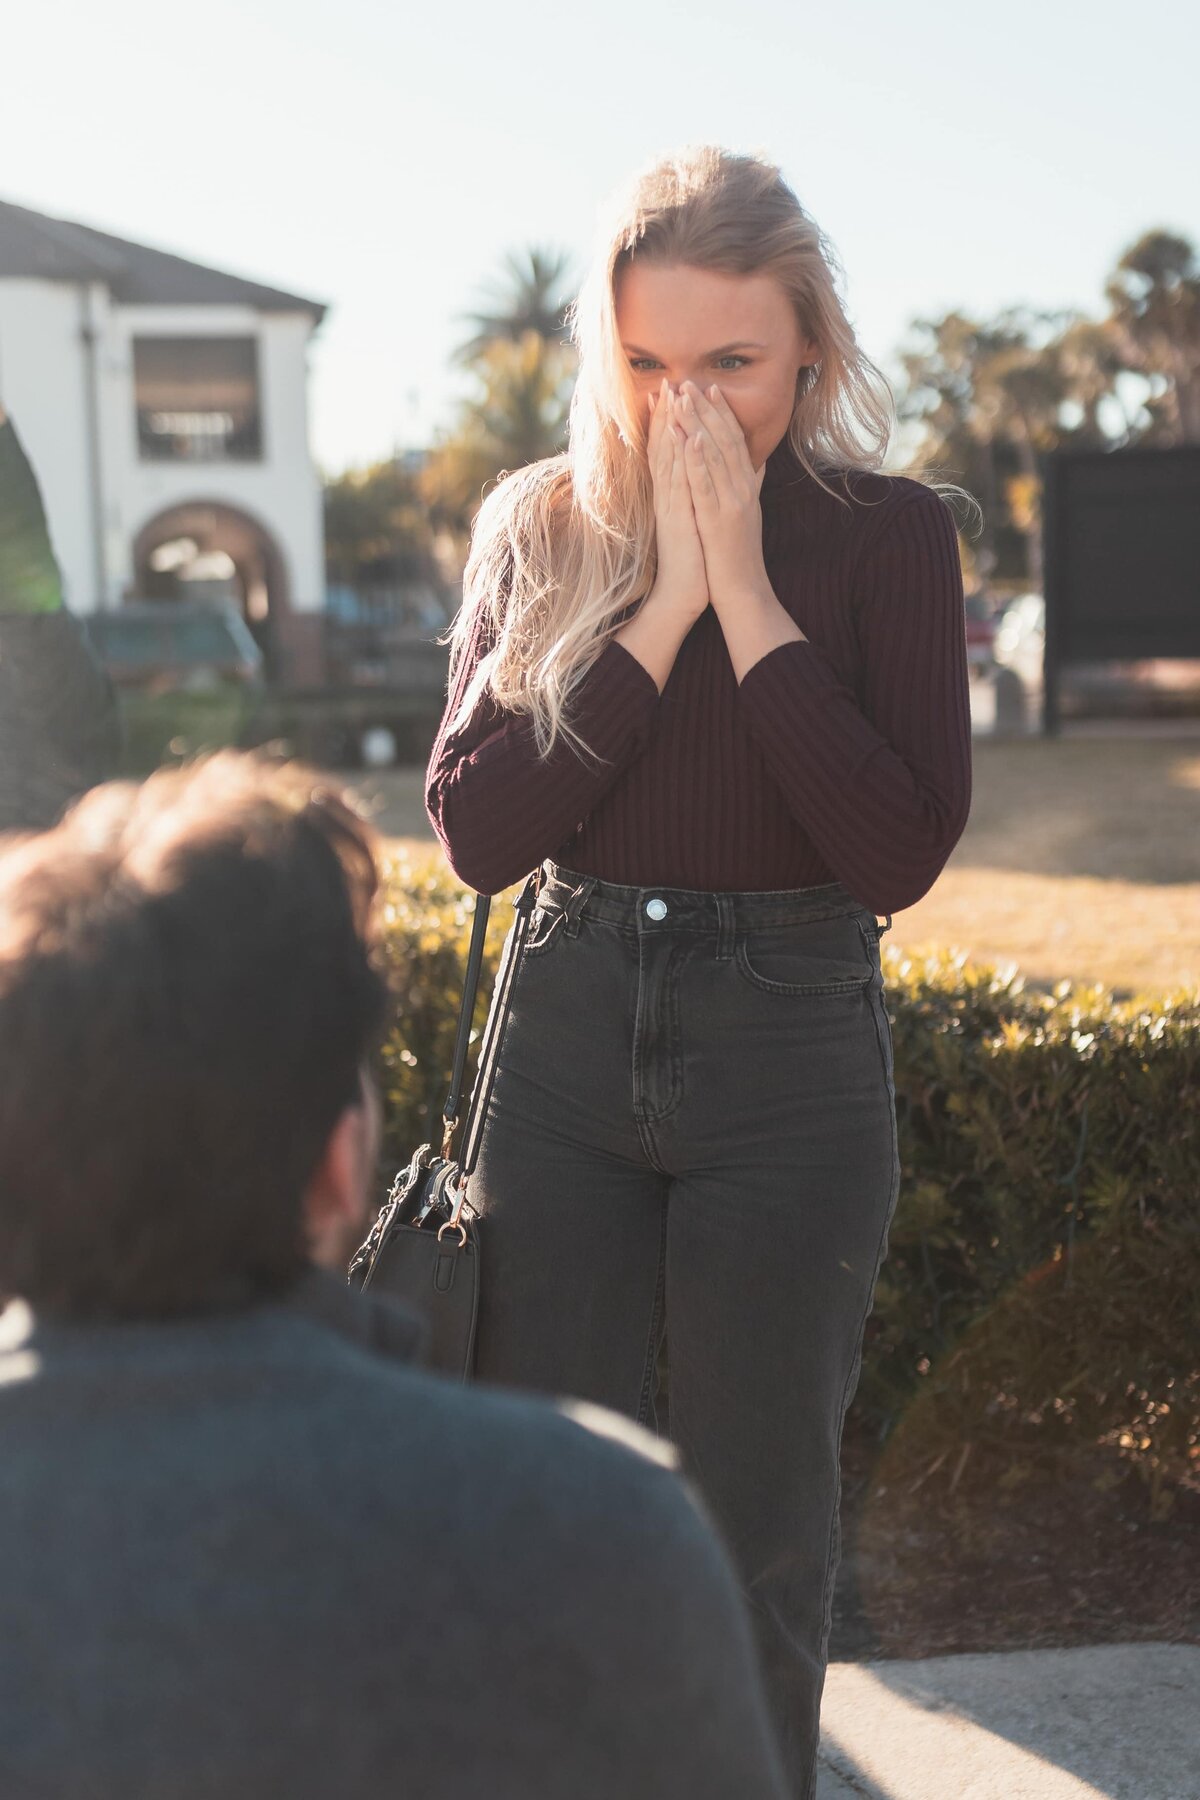 Surprise Proposal Photography St. Augustine | Proposal Photographer St. Augustine